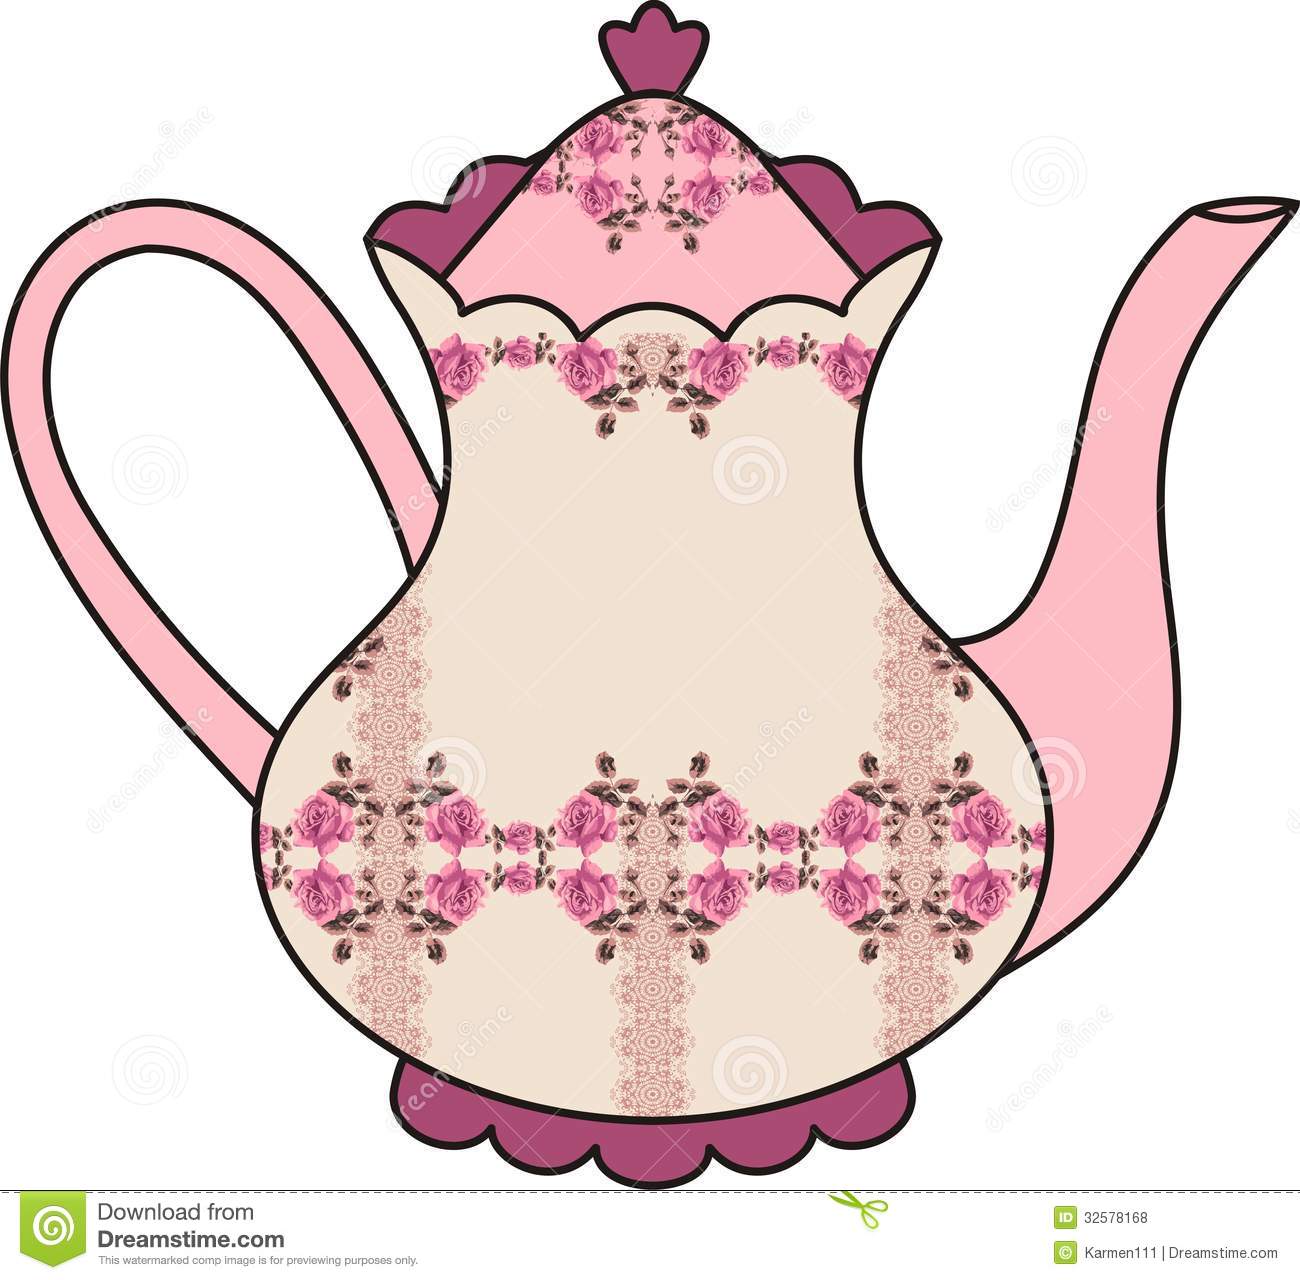 Royalty Free Stock Photos  Floral Roses Teapot  Time For Tea   Shabby